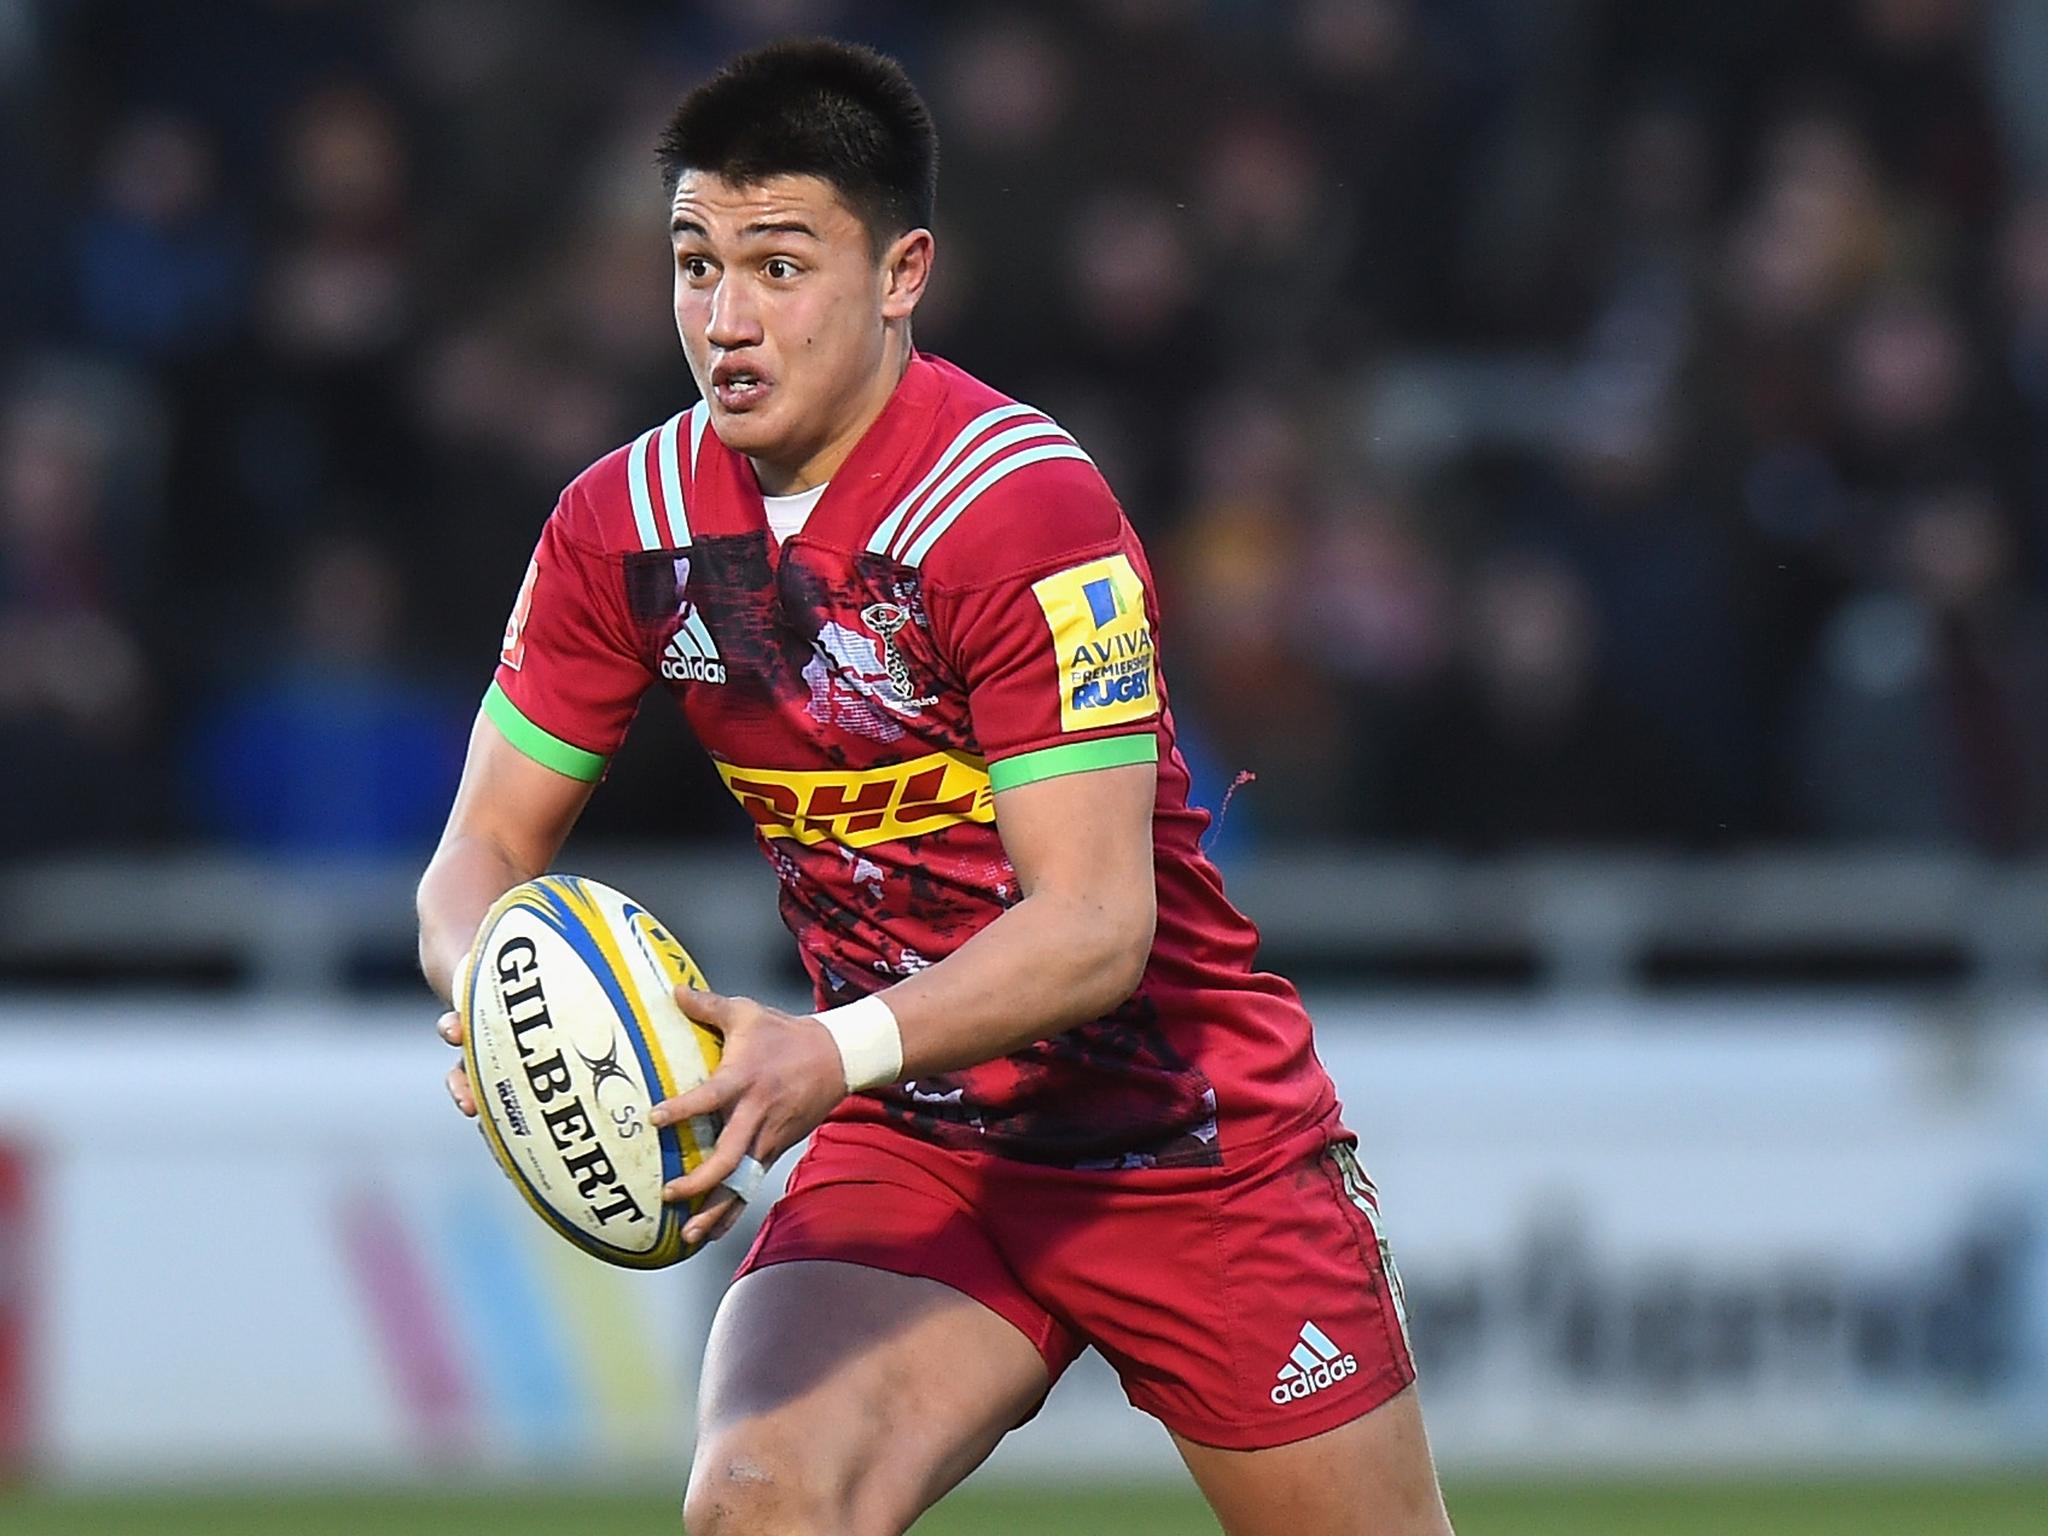 Marcus Smith has signed a new contract with Harlequins worth £230,000-a-season